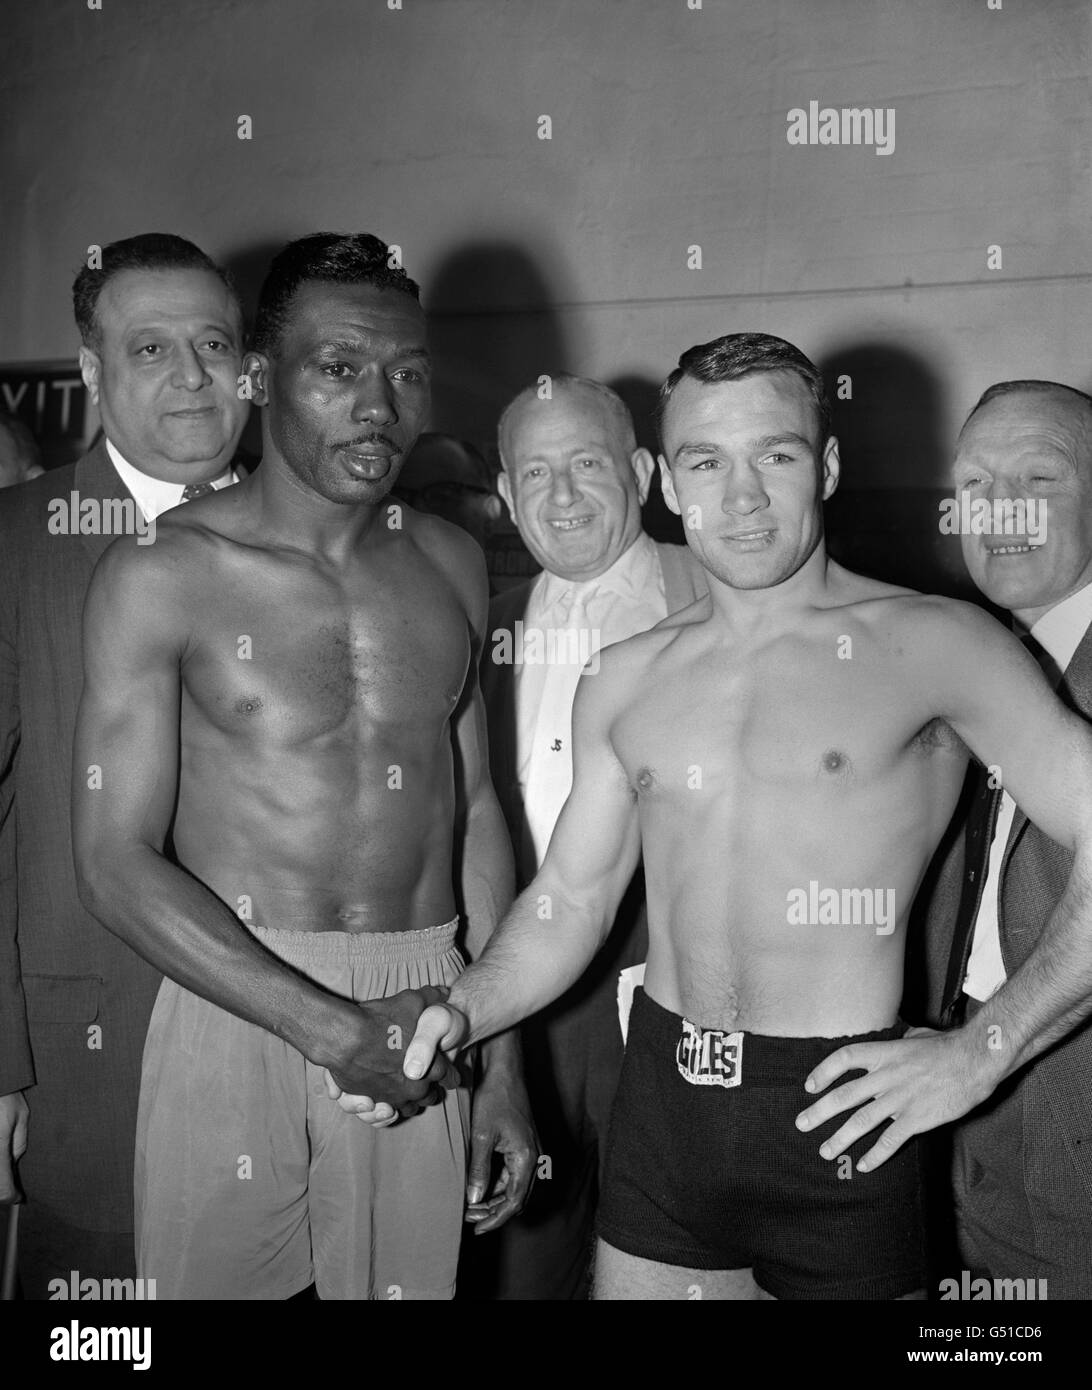 Lightweight Champion Joe Brown (l) from America and British challenger Dave Charnley, who is British Empire and European Champion (r), at the weigh-in at Jack Soloman's Office, Great Windmill Street, ahead of their fight that evening to be held at. The fight was voted 1961 Ring Magazine Fight of the Year. Stock Photo